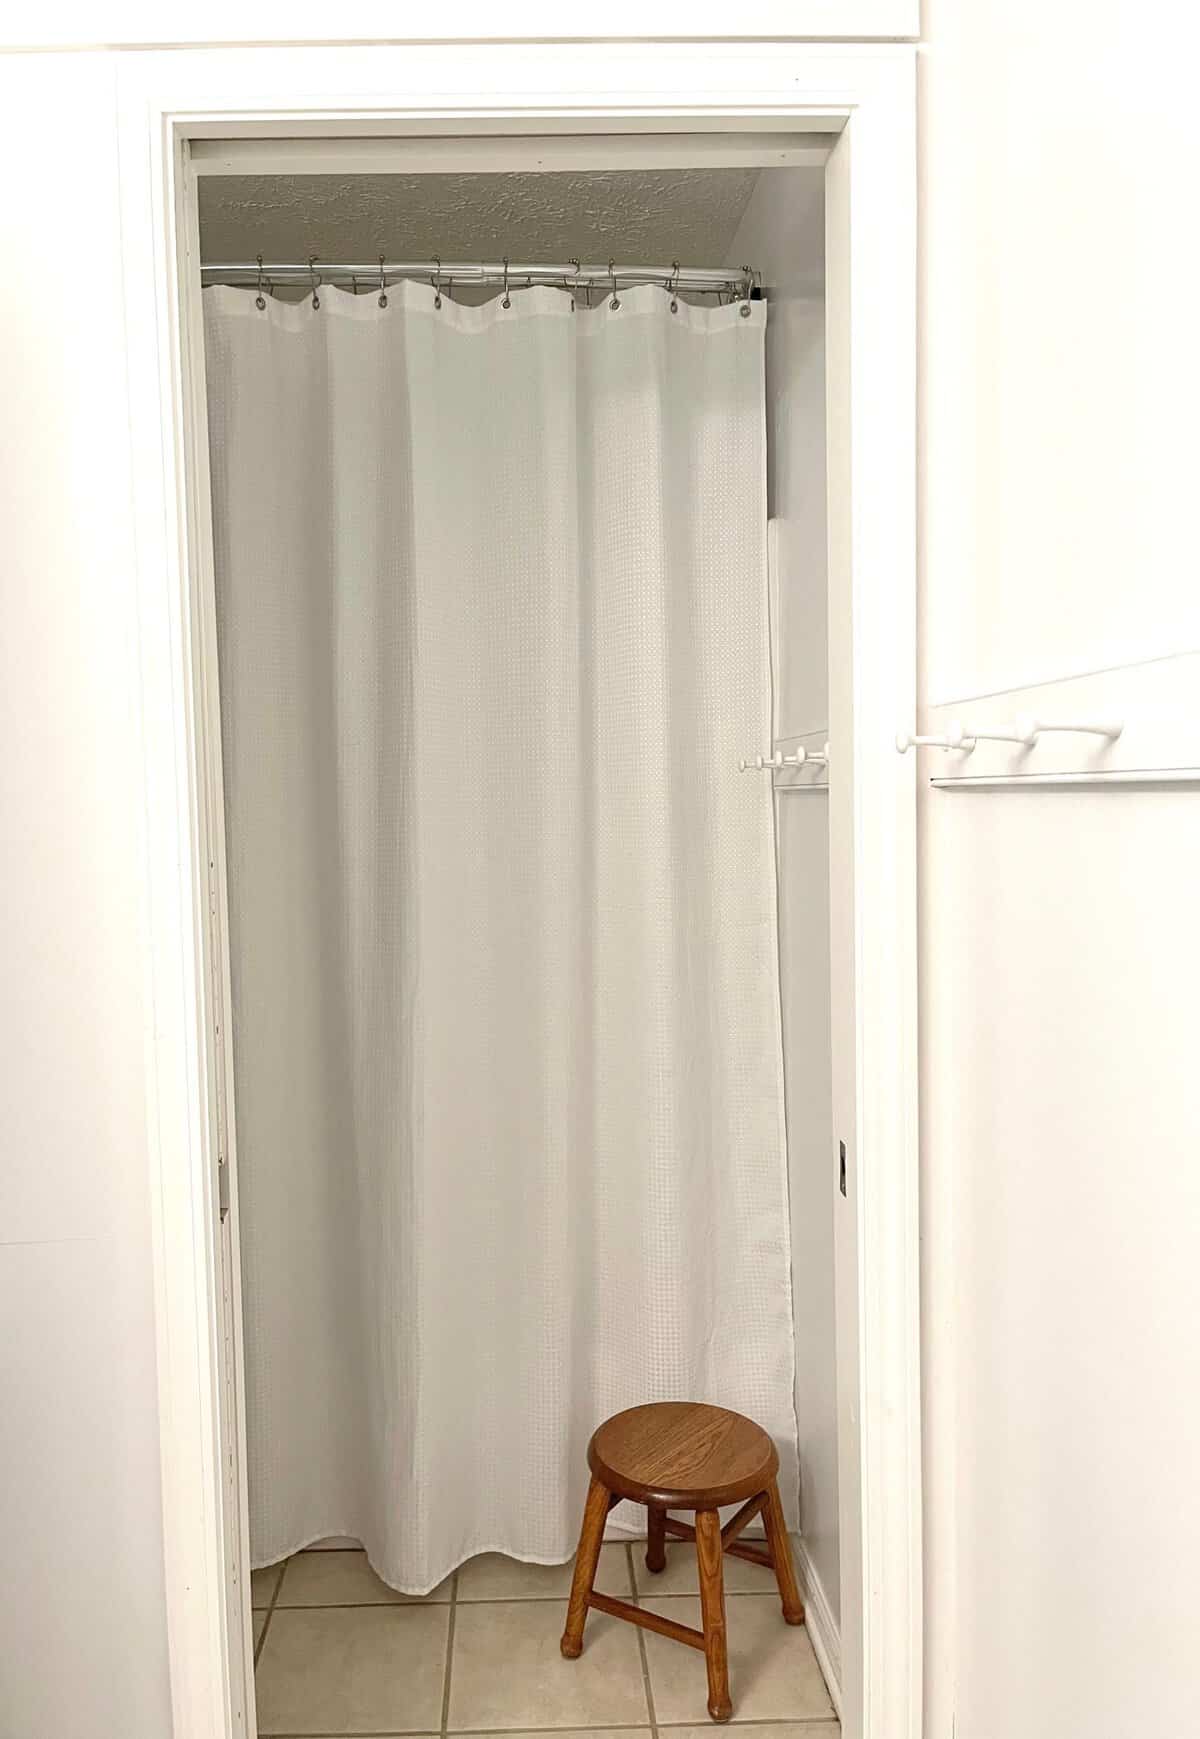 replacing shower glass door with curtain rod